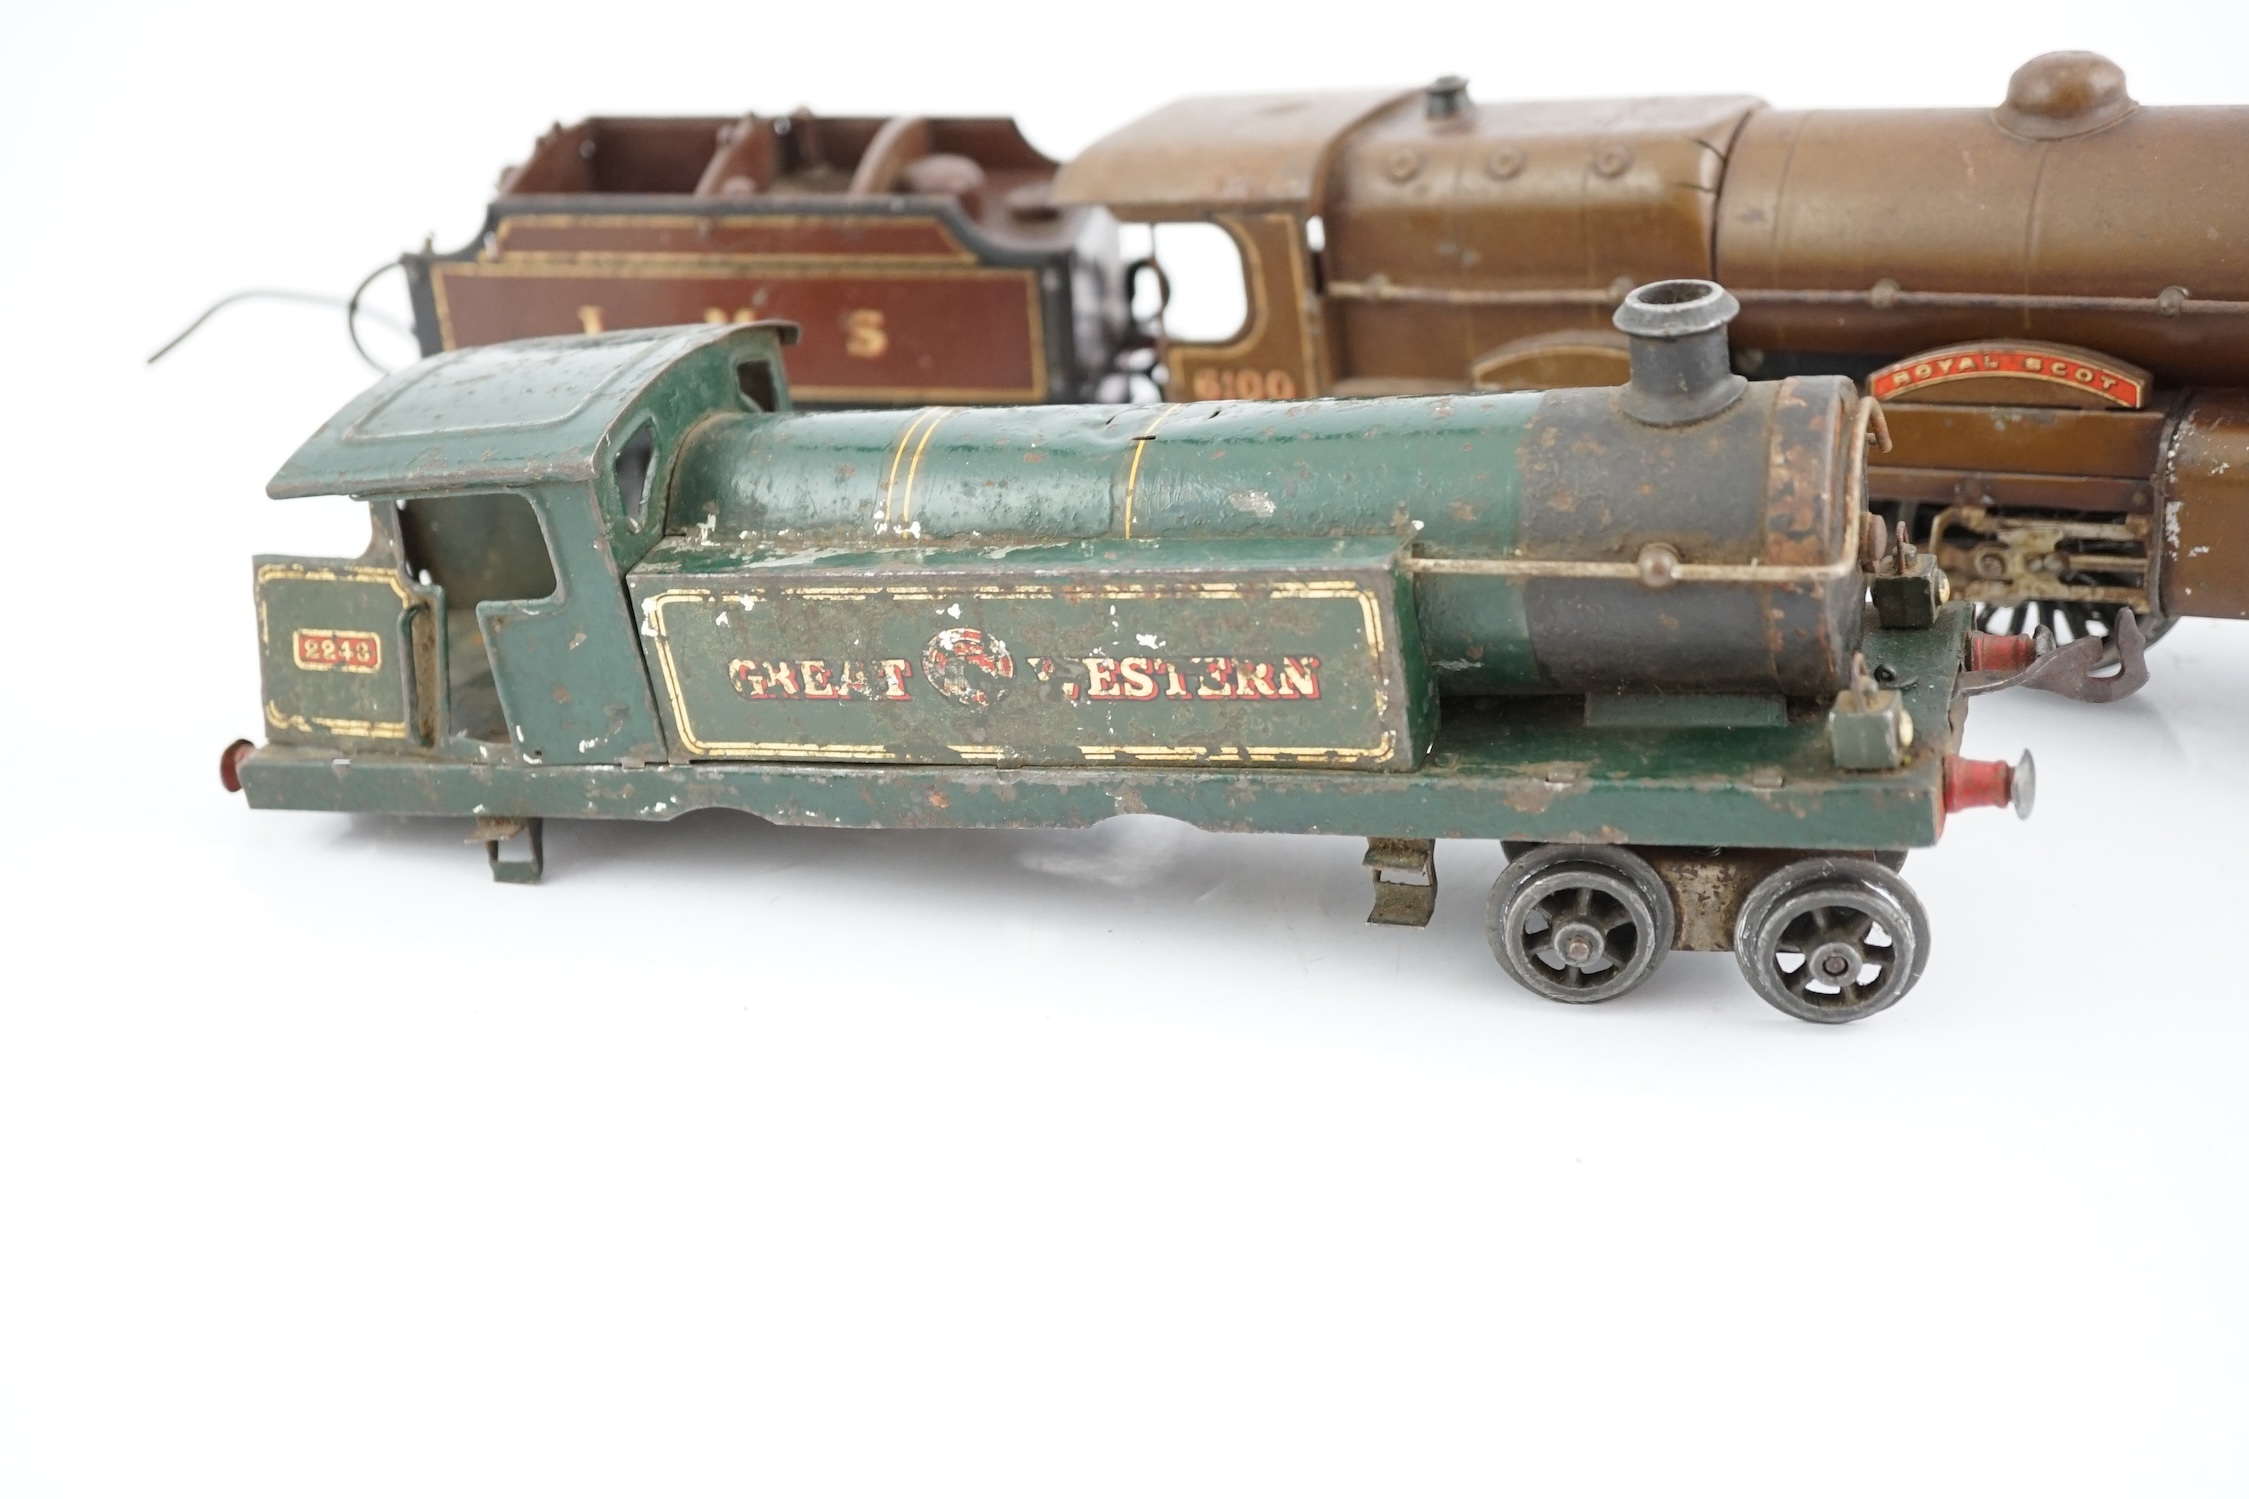 Two Hornby Series 0 gauge tinplate locomotives for 3-rail running; an LMS 4-4-2, Royal Scot 6100, - Image 6 of 9